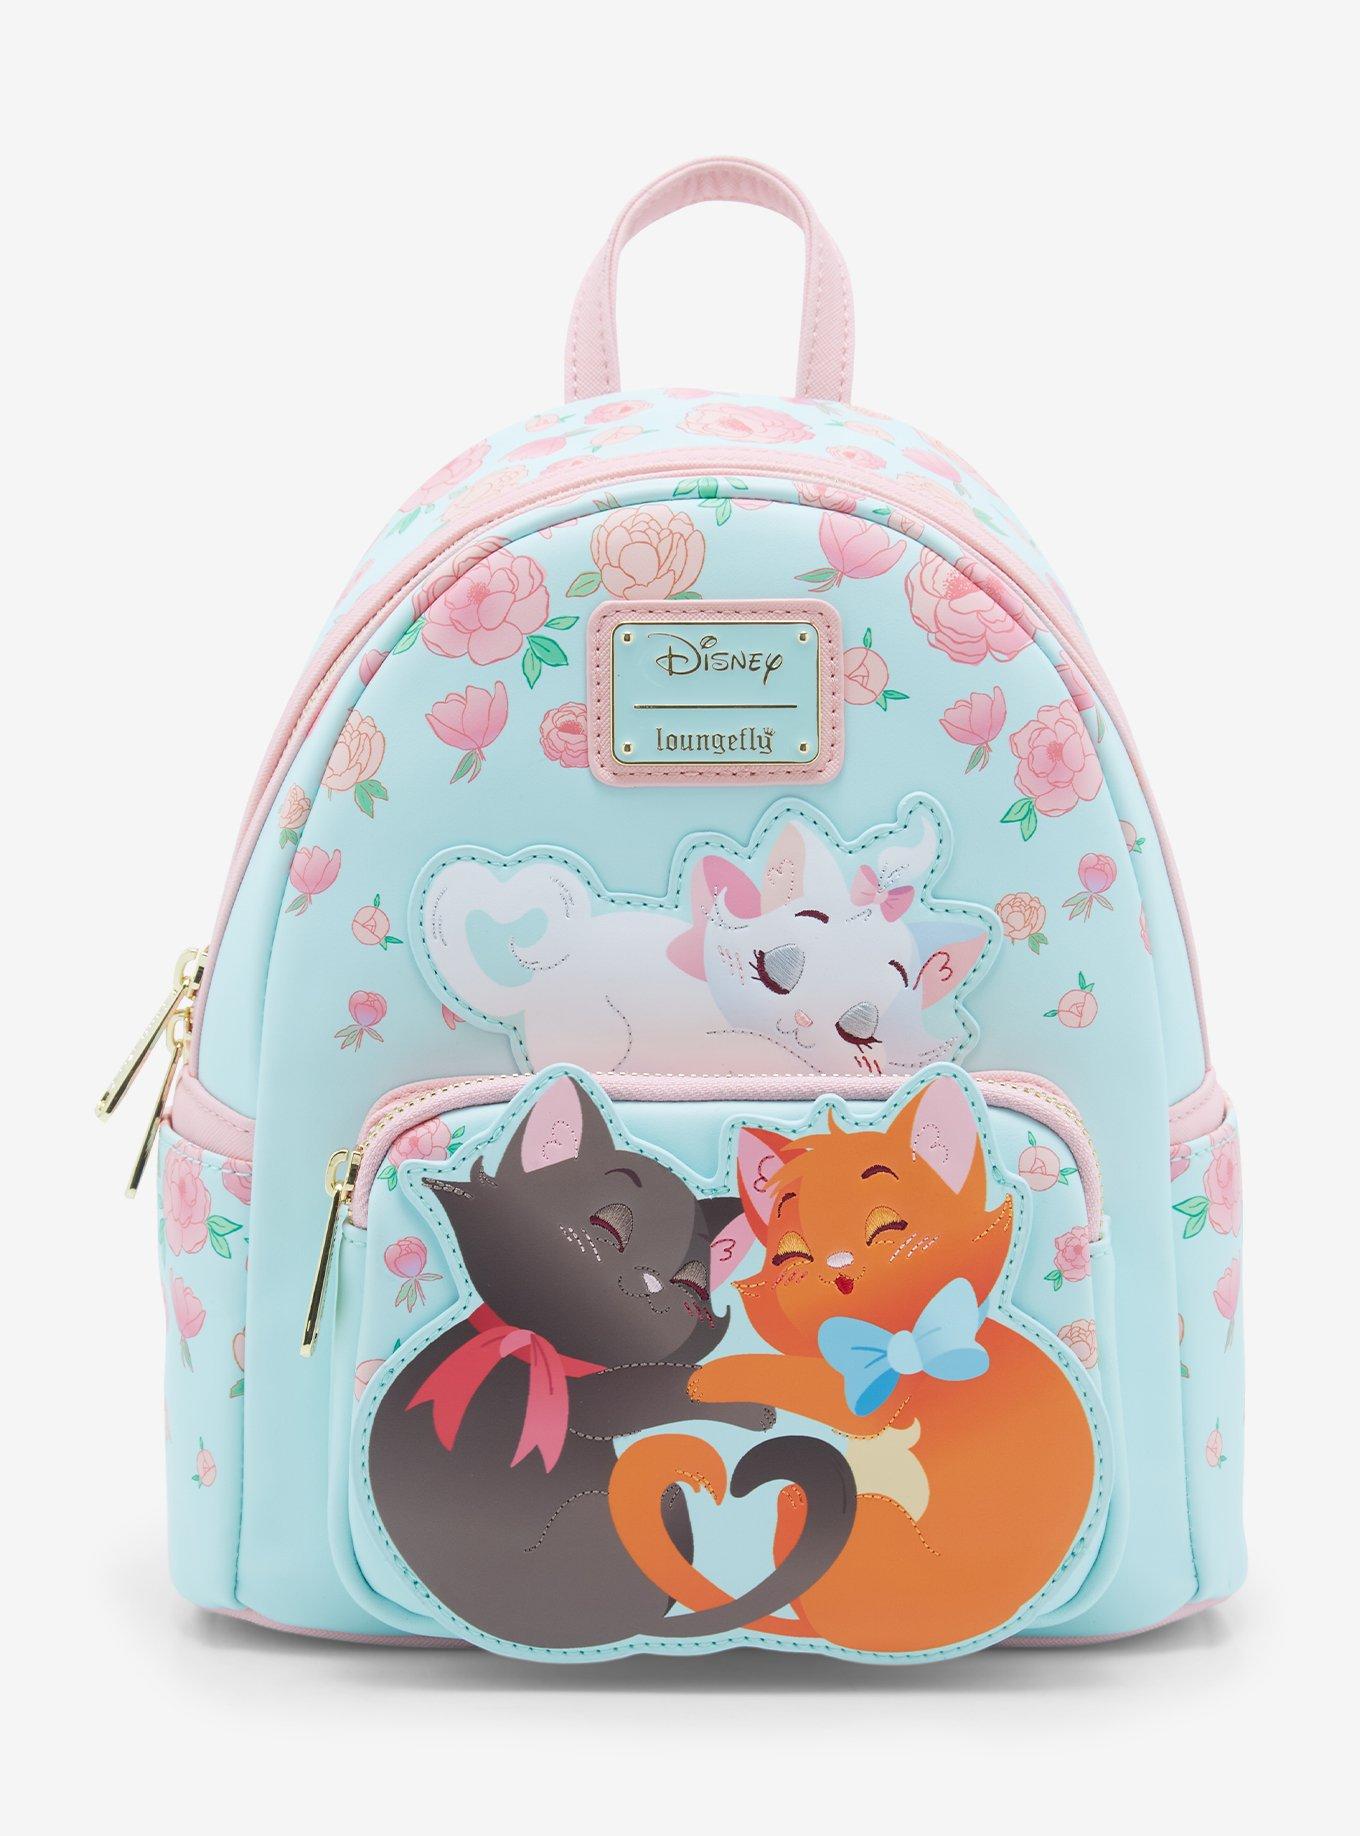 Aristocats Loungefly bag review